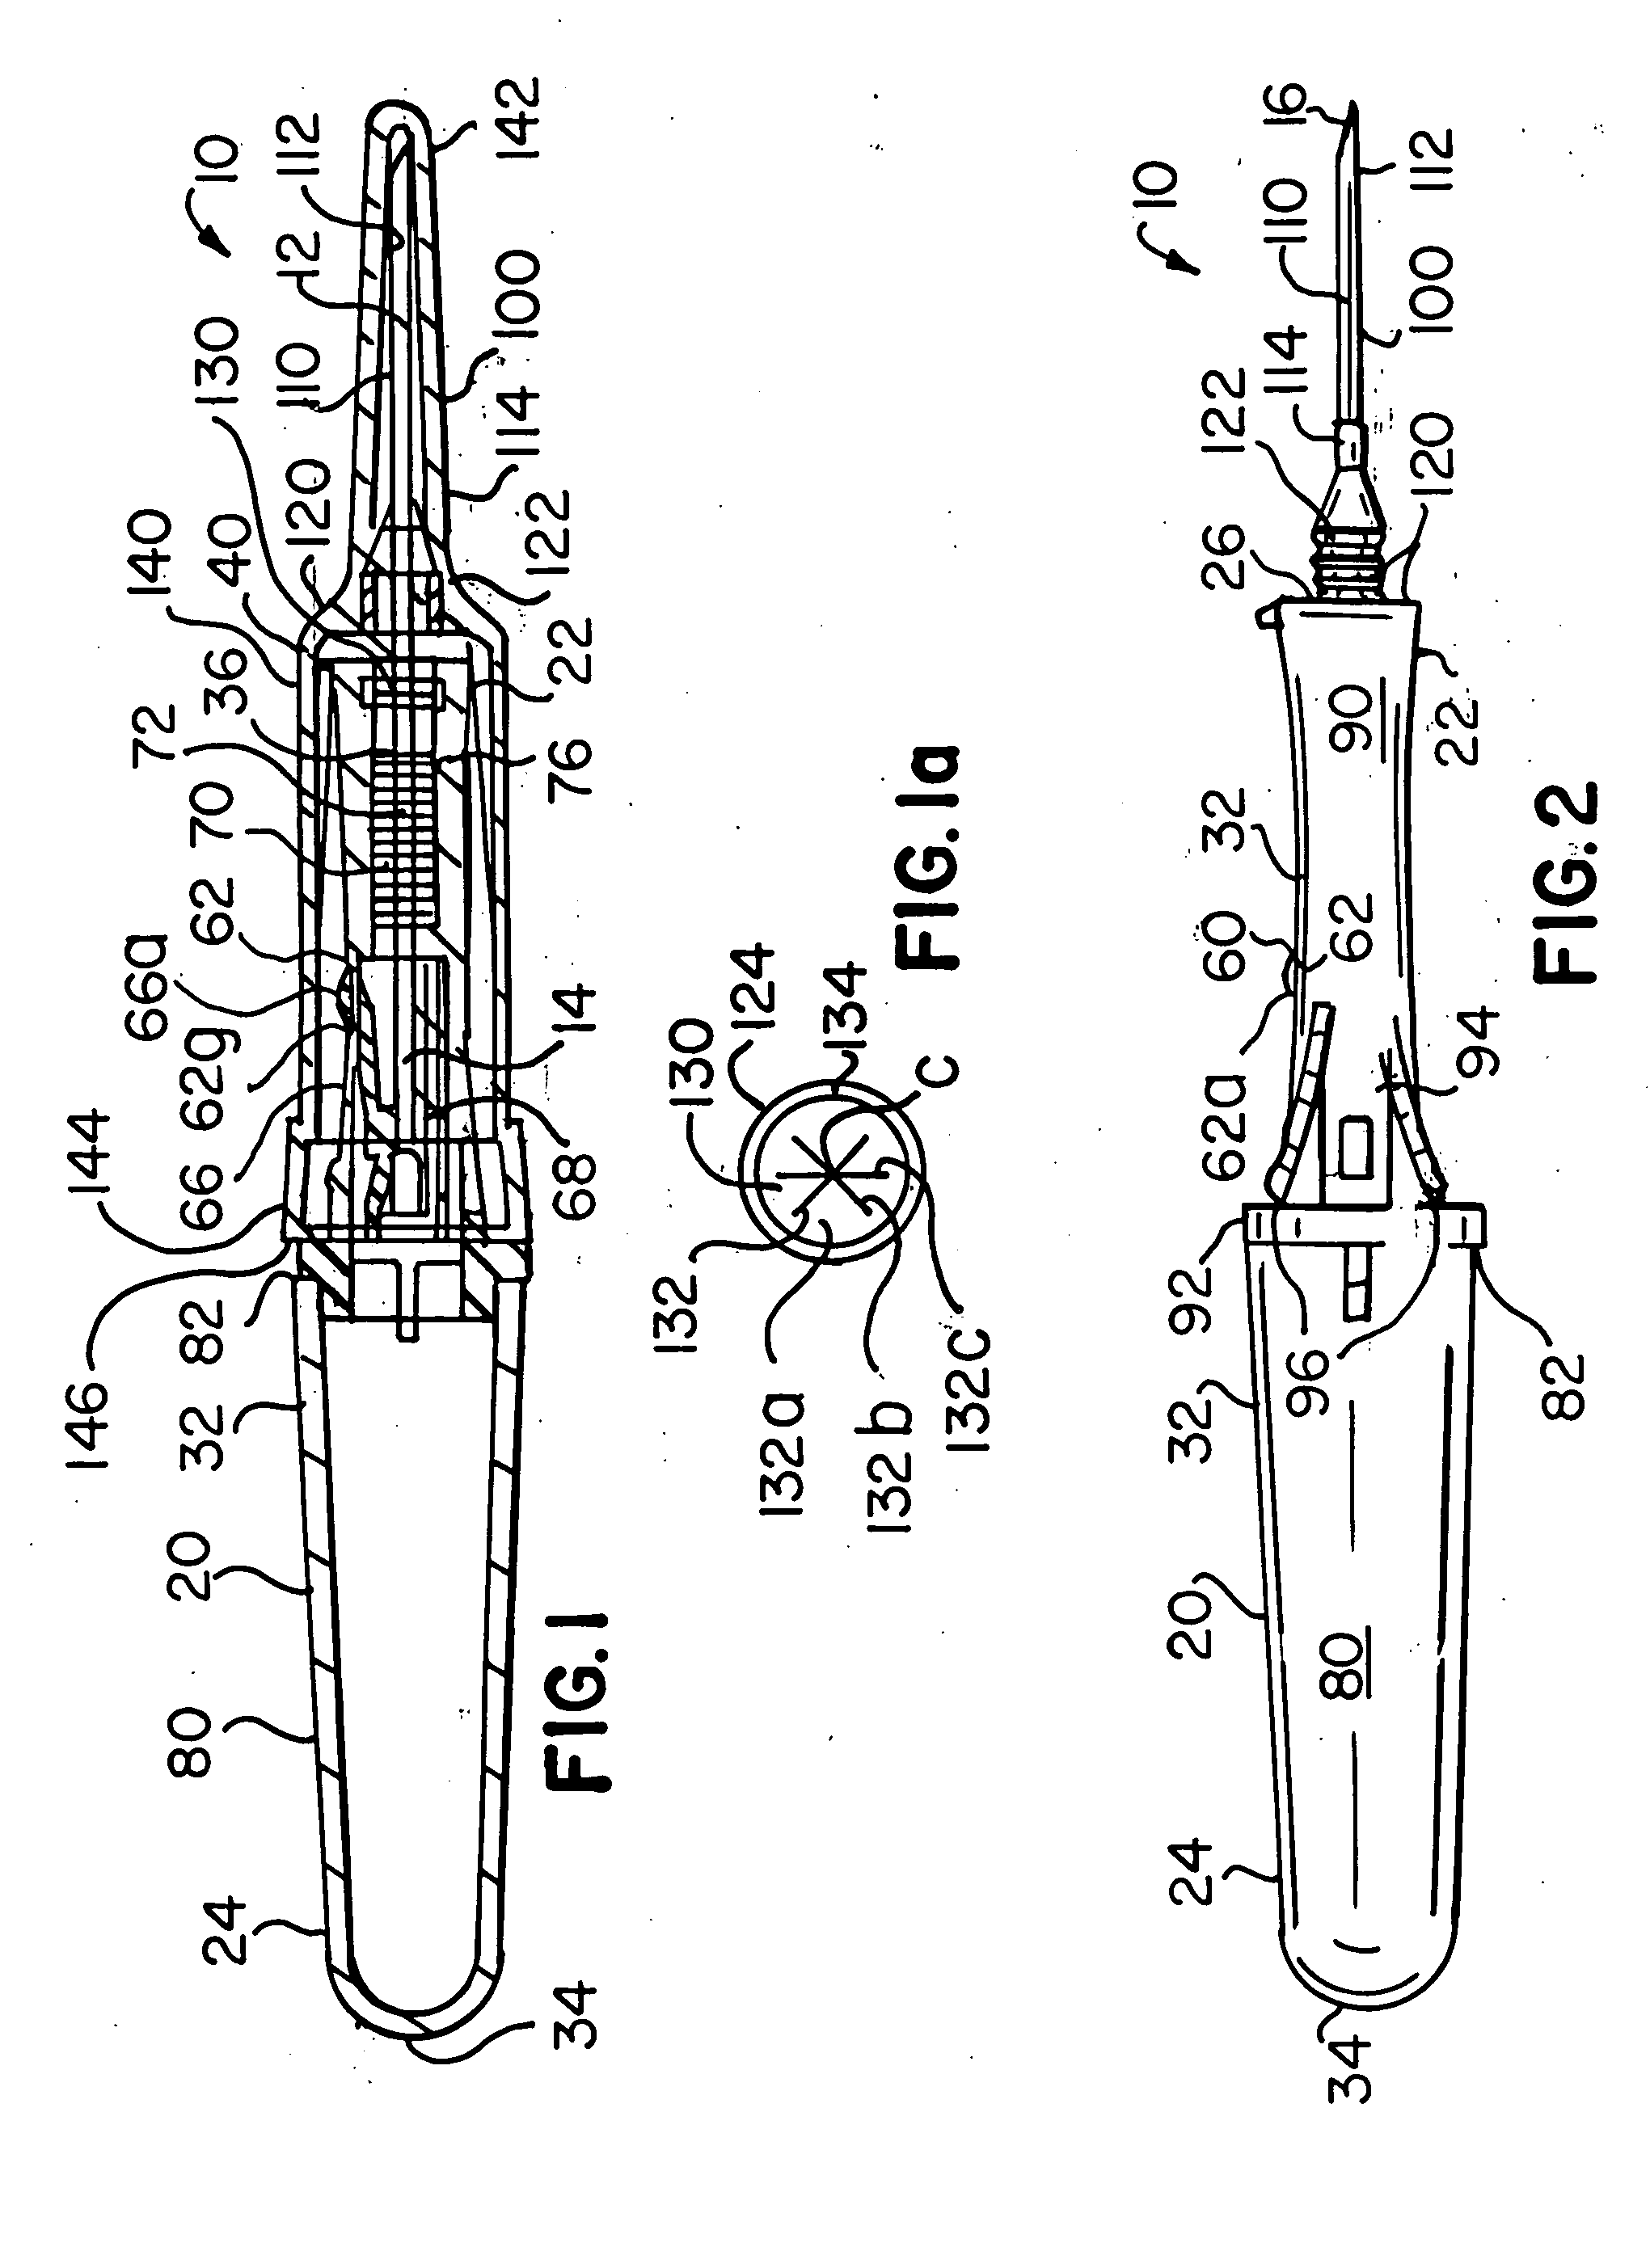 Bloodless catheter and needle shielding catheter insertion apparatus